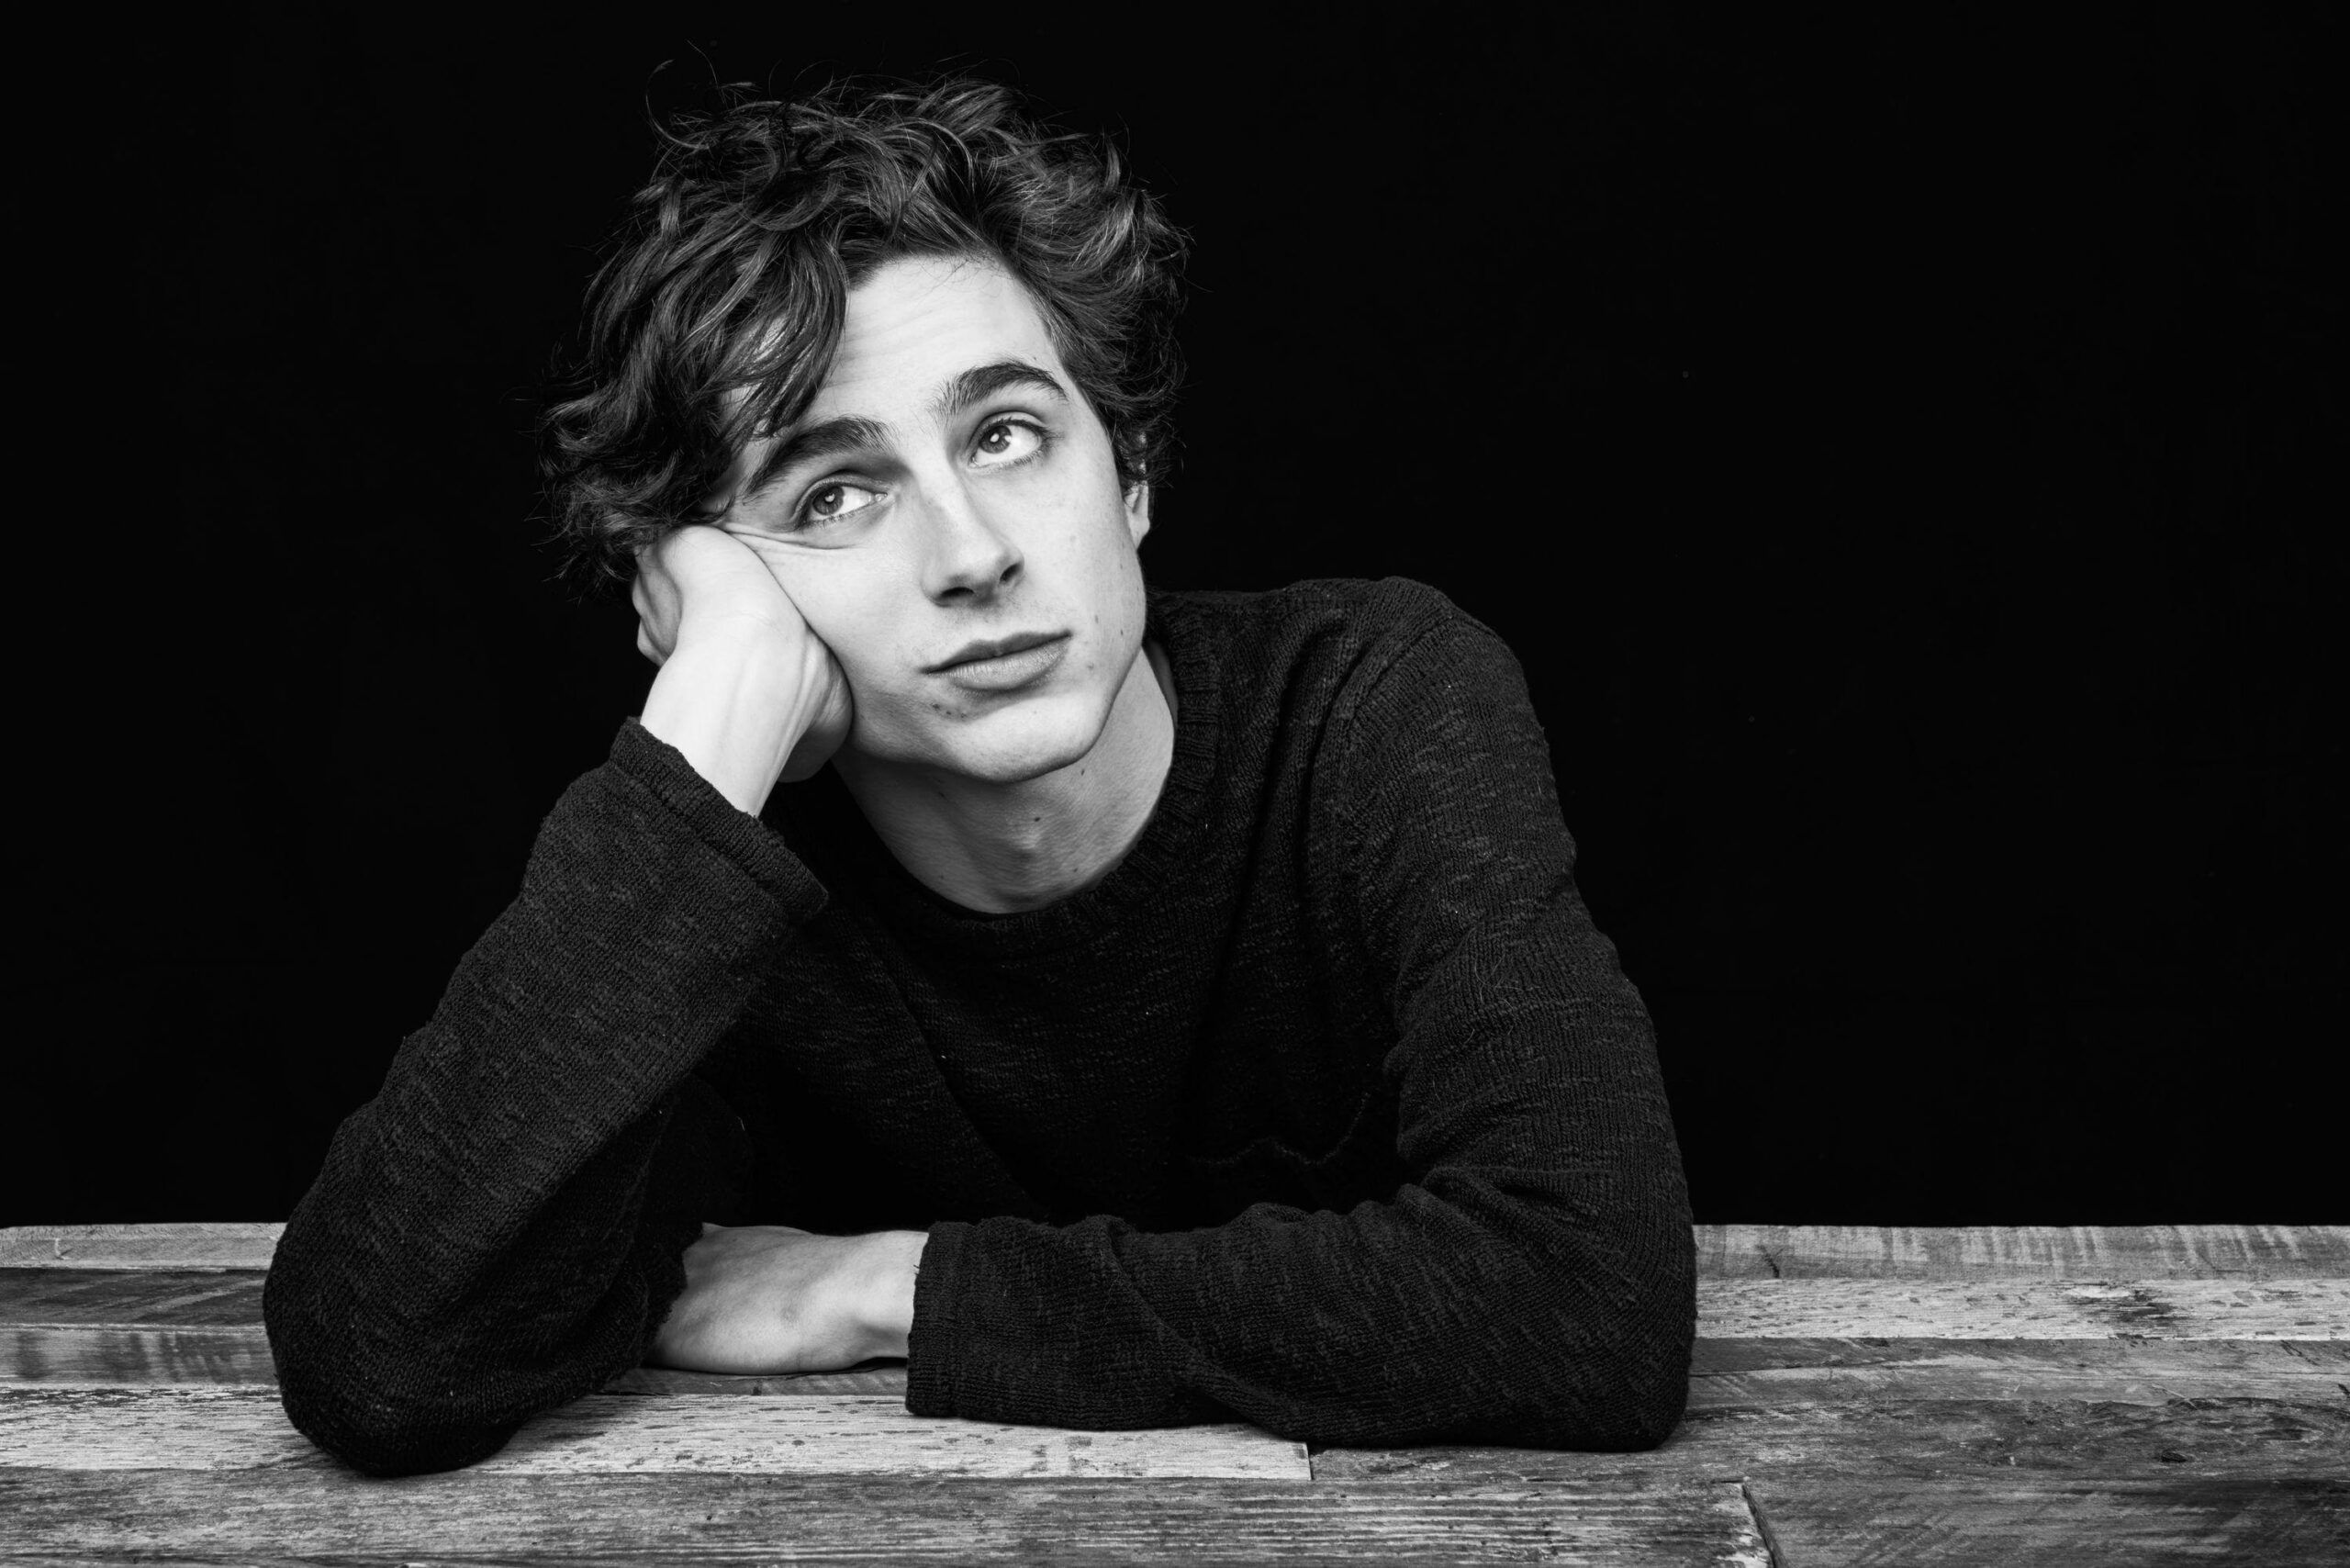 Timothee Chalamet is the new face of Dior's first men's grooming line - Timothee Chalamet